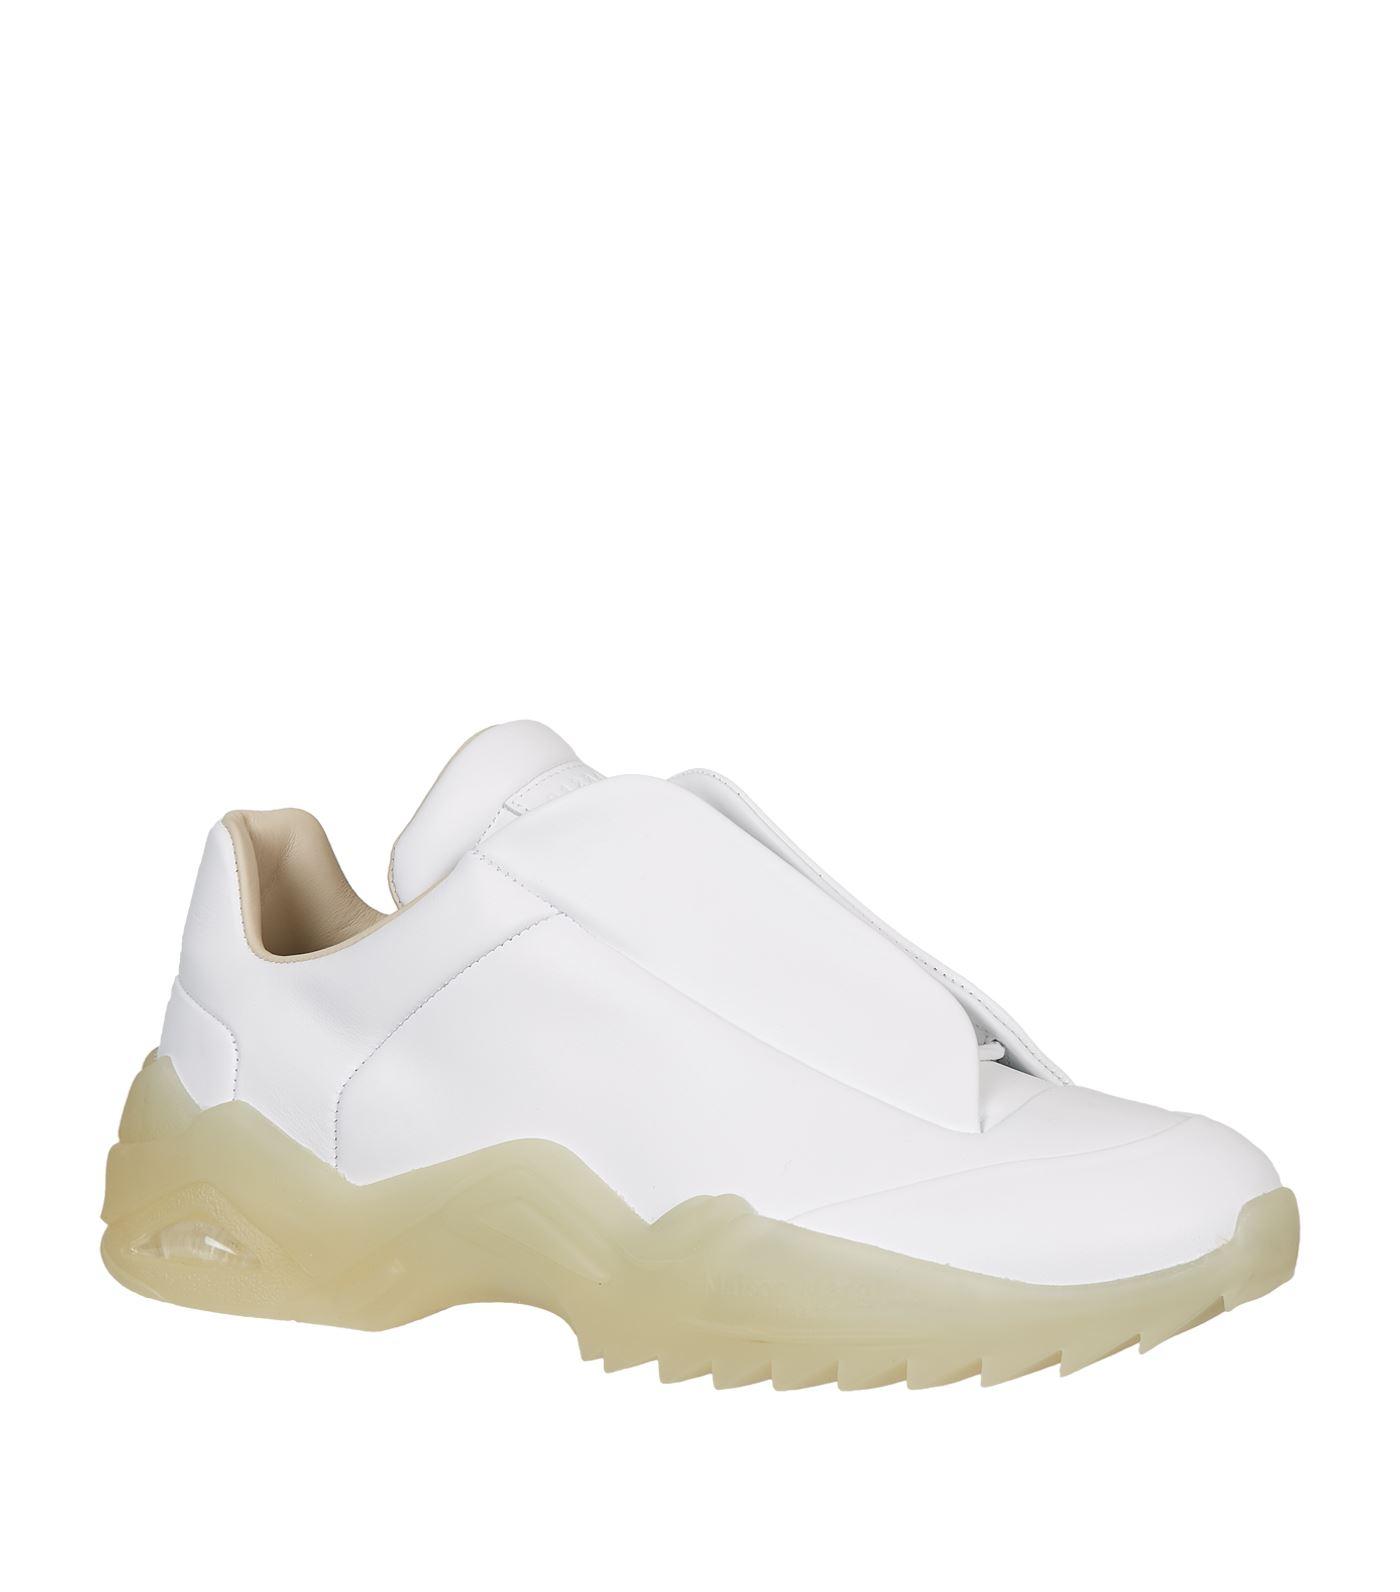 Maison Margiela Leather Future Low-top Sneakers in White for Men - Lyst